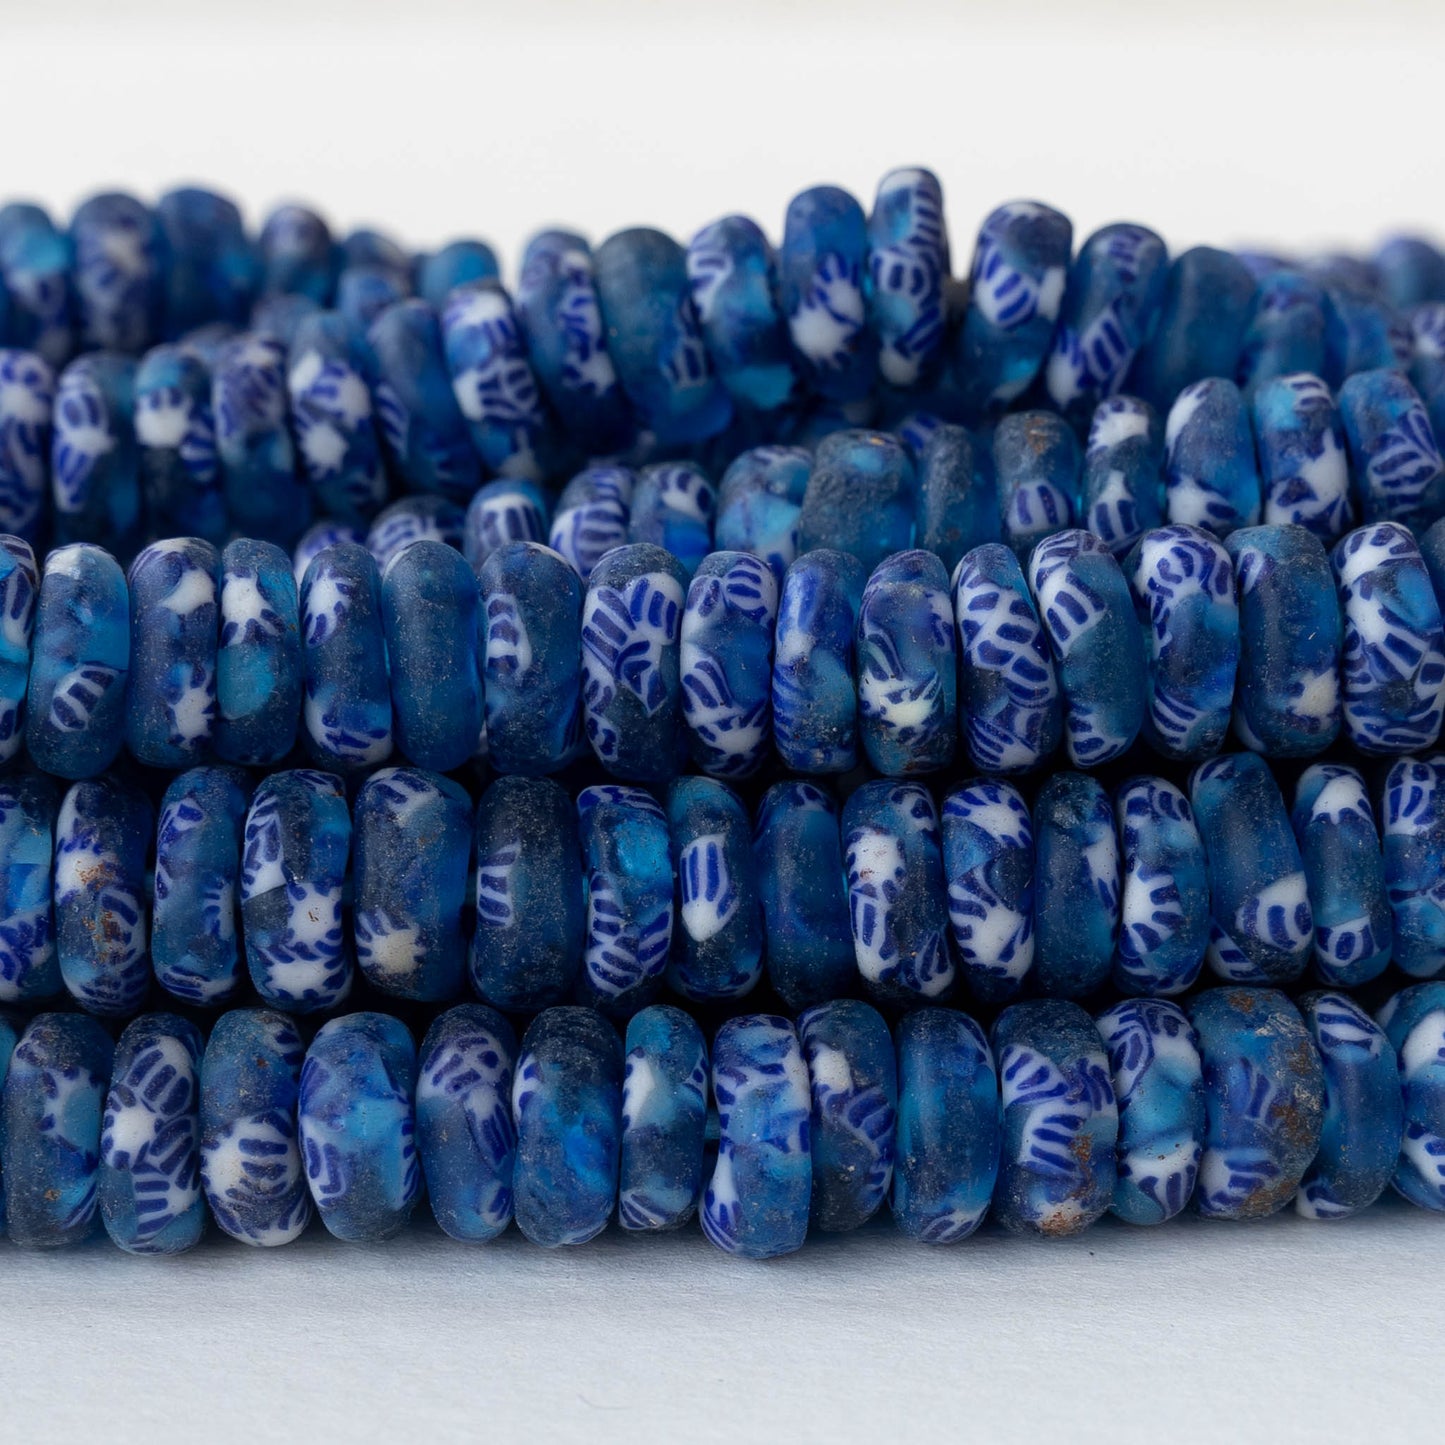 10mm Krobo Donut Beads  - Blue and Blue - 10 inches